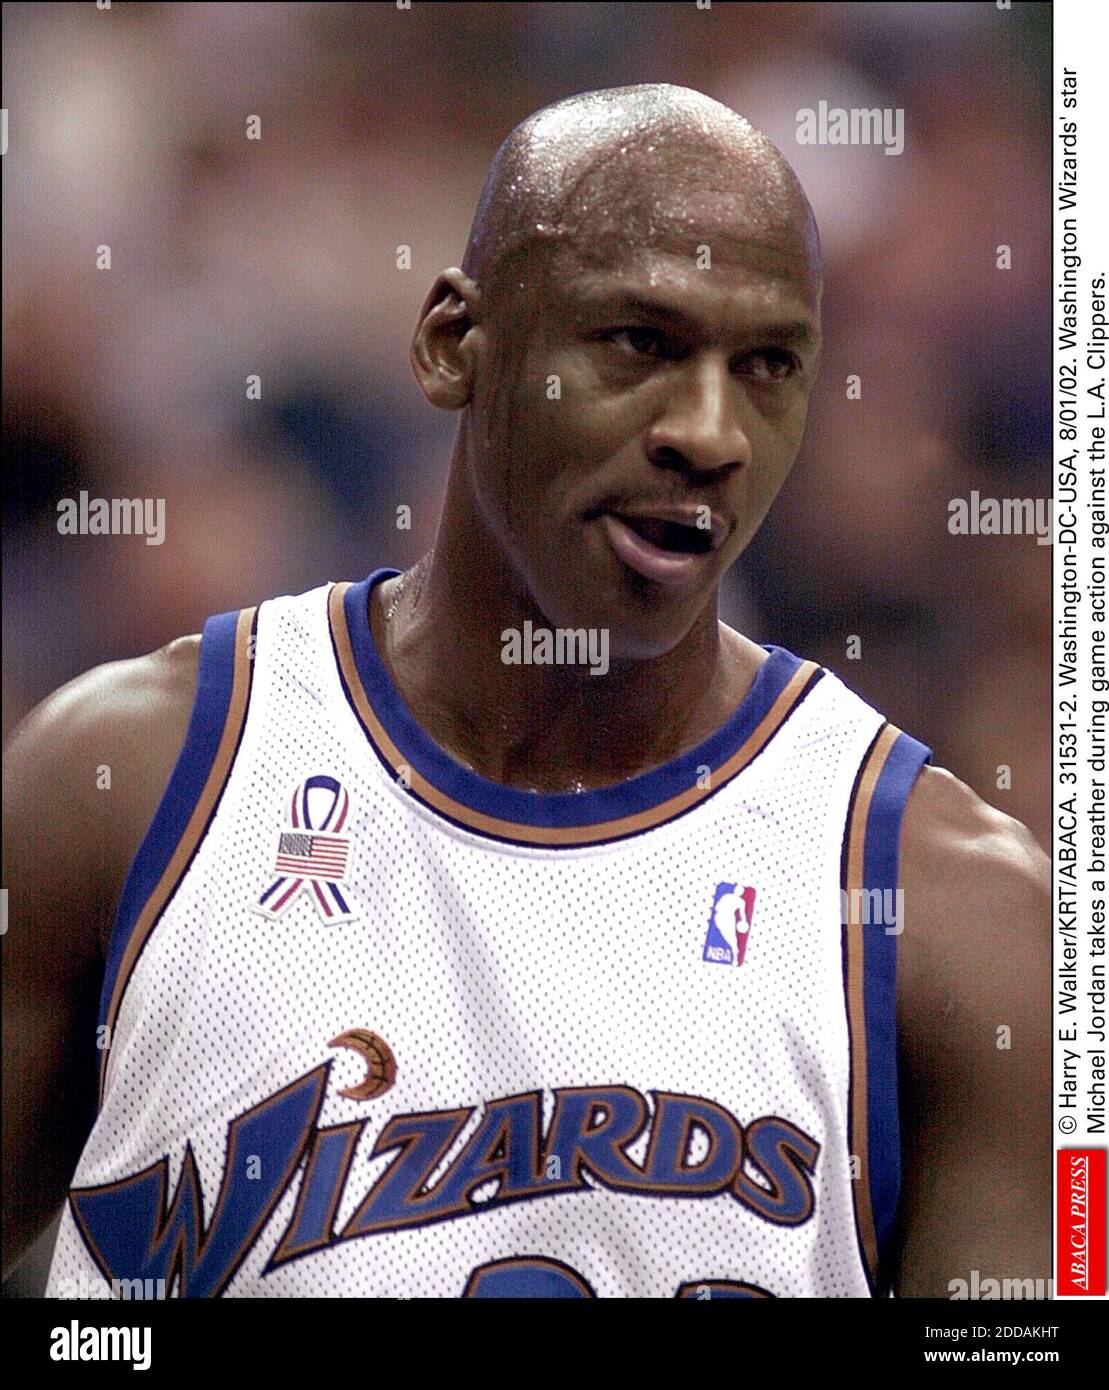 NO FILM, NO VIDEO, NO TV, NO DOCUMENTARY - © Harry E. Walker/KRT/ABACA.  31531-2. Washington-DC-USA, 8/01/02. Washington Wizards' star Michael Jordan  takes a breather during game action against the Los Angeles Clippers